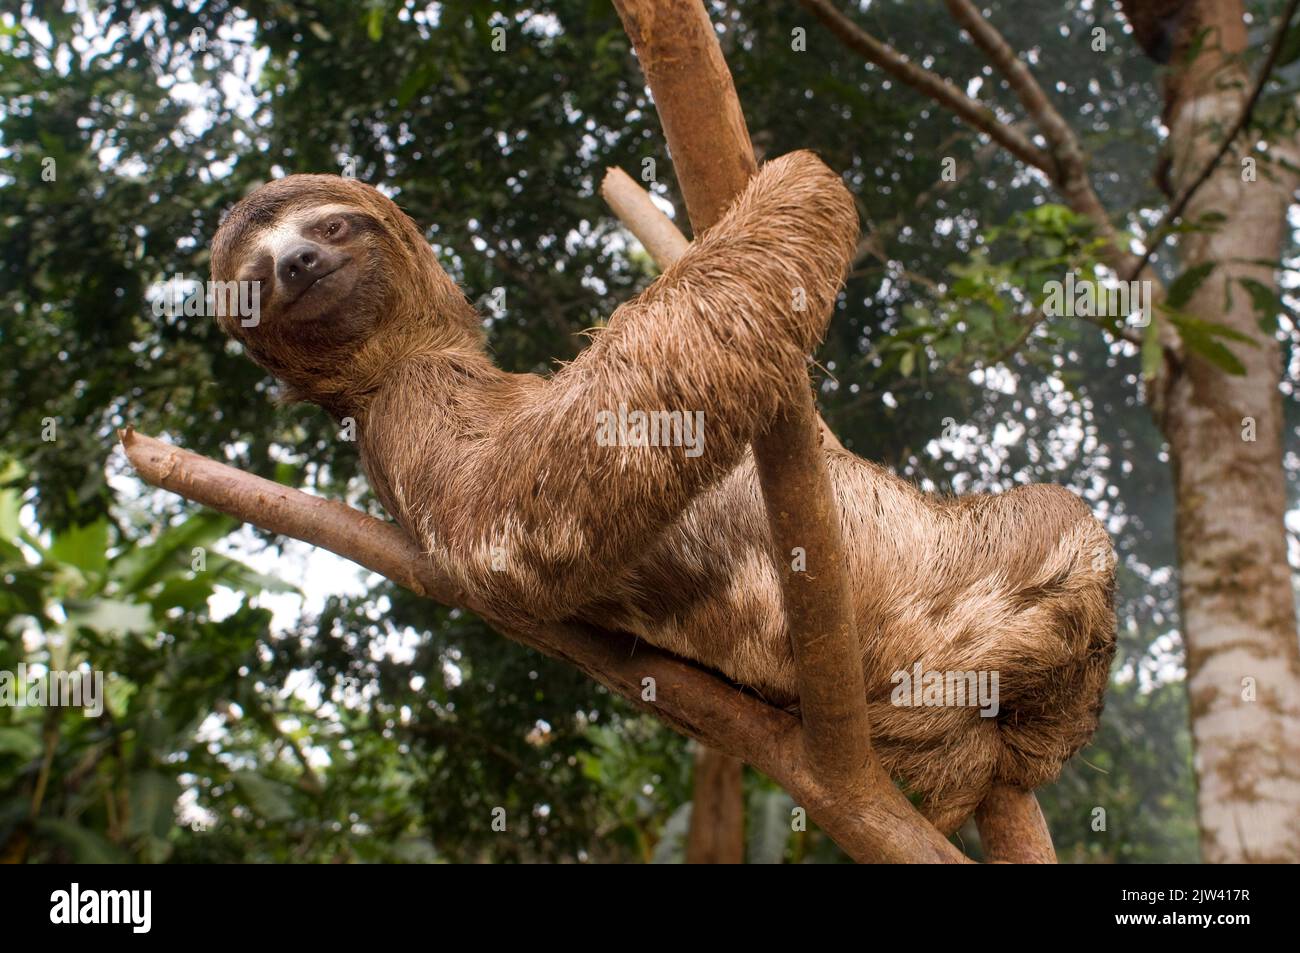 An sloth bear climbed a tree in a primary forest in the Amazon rainforest, near Iquitos, Loreto, Peru.   Many species of animals, unique in the world, Stock Photo